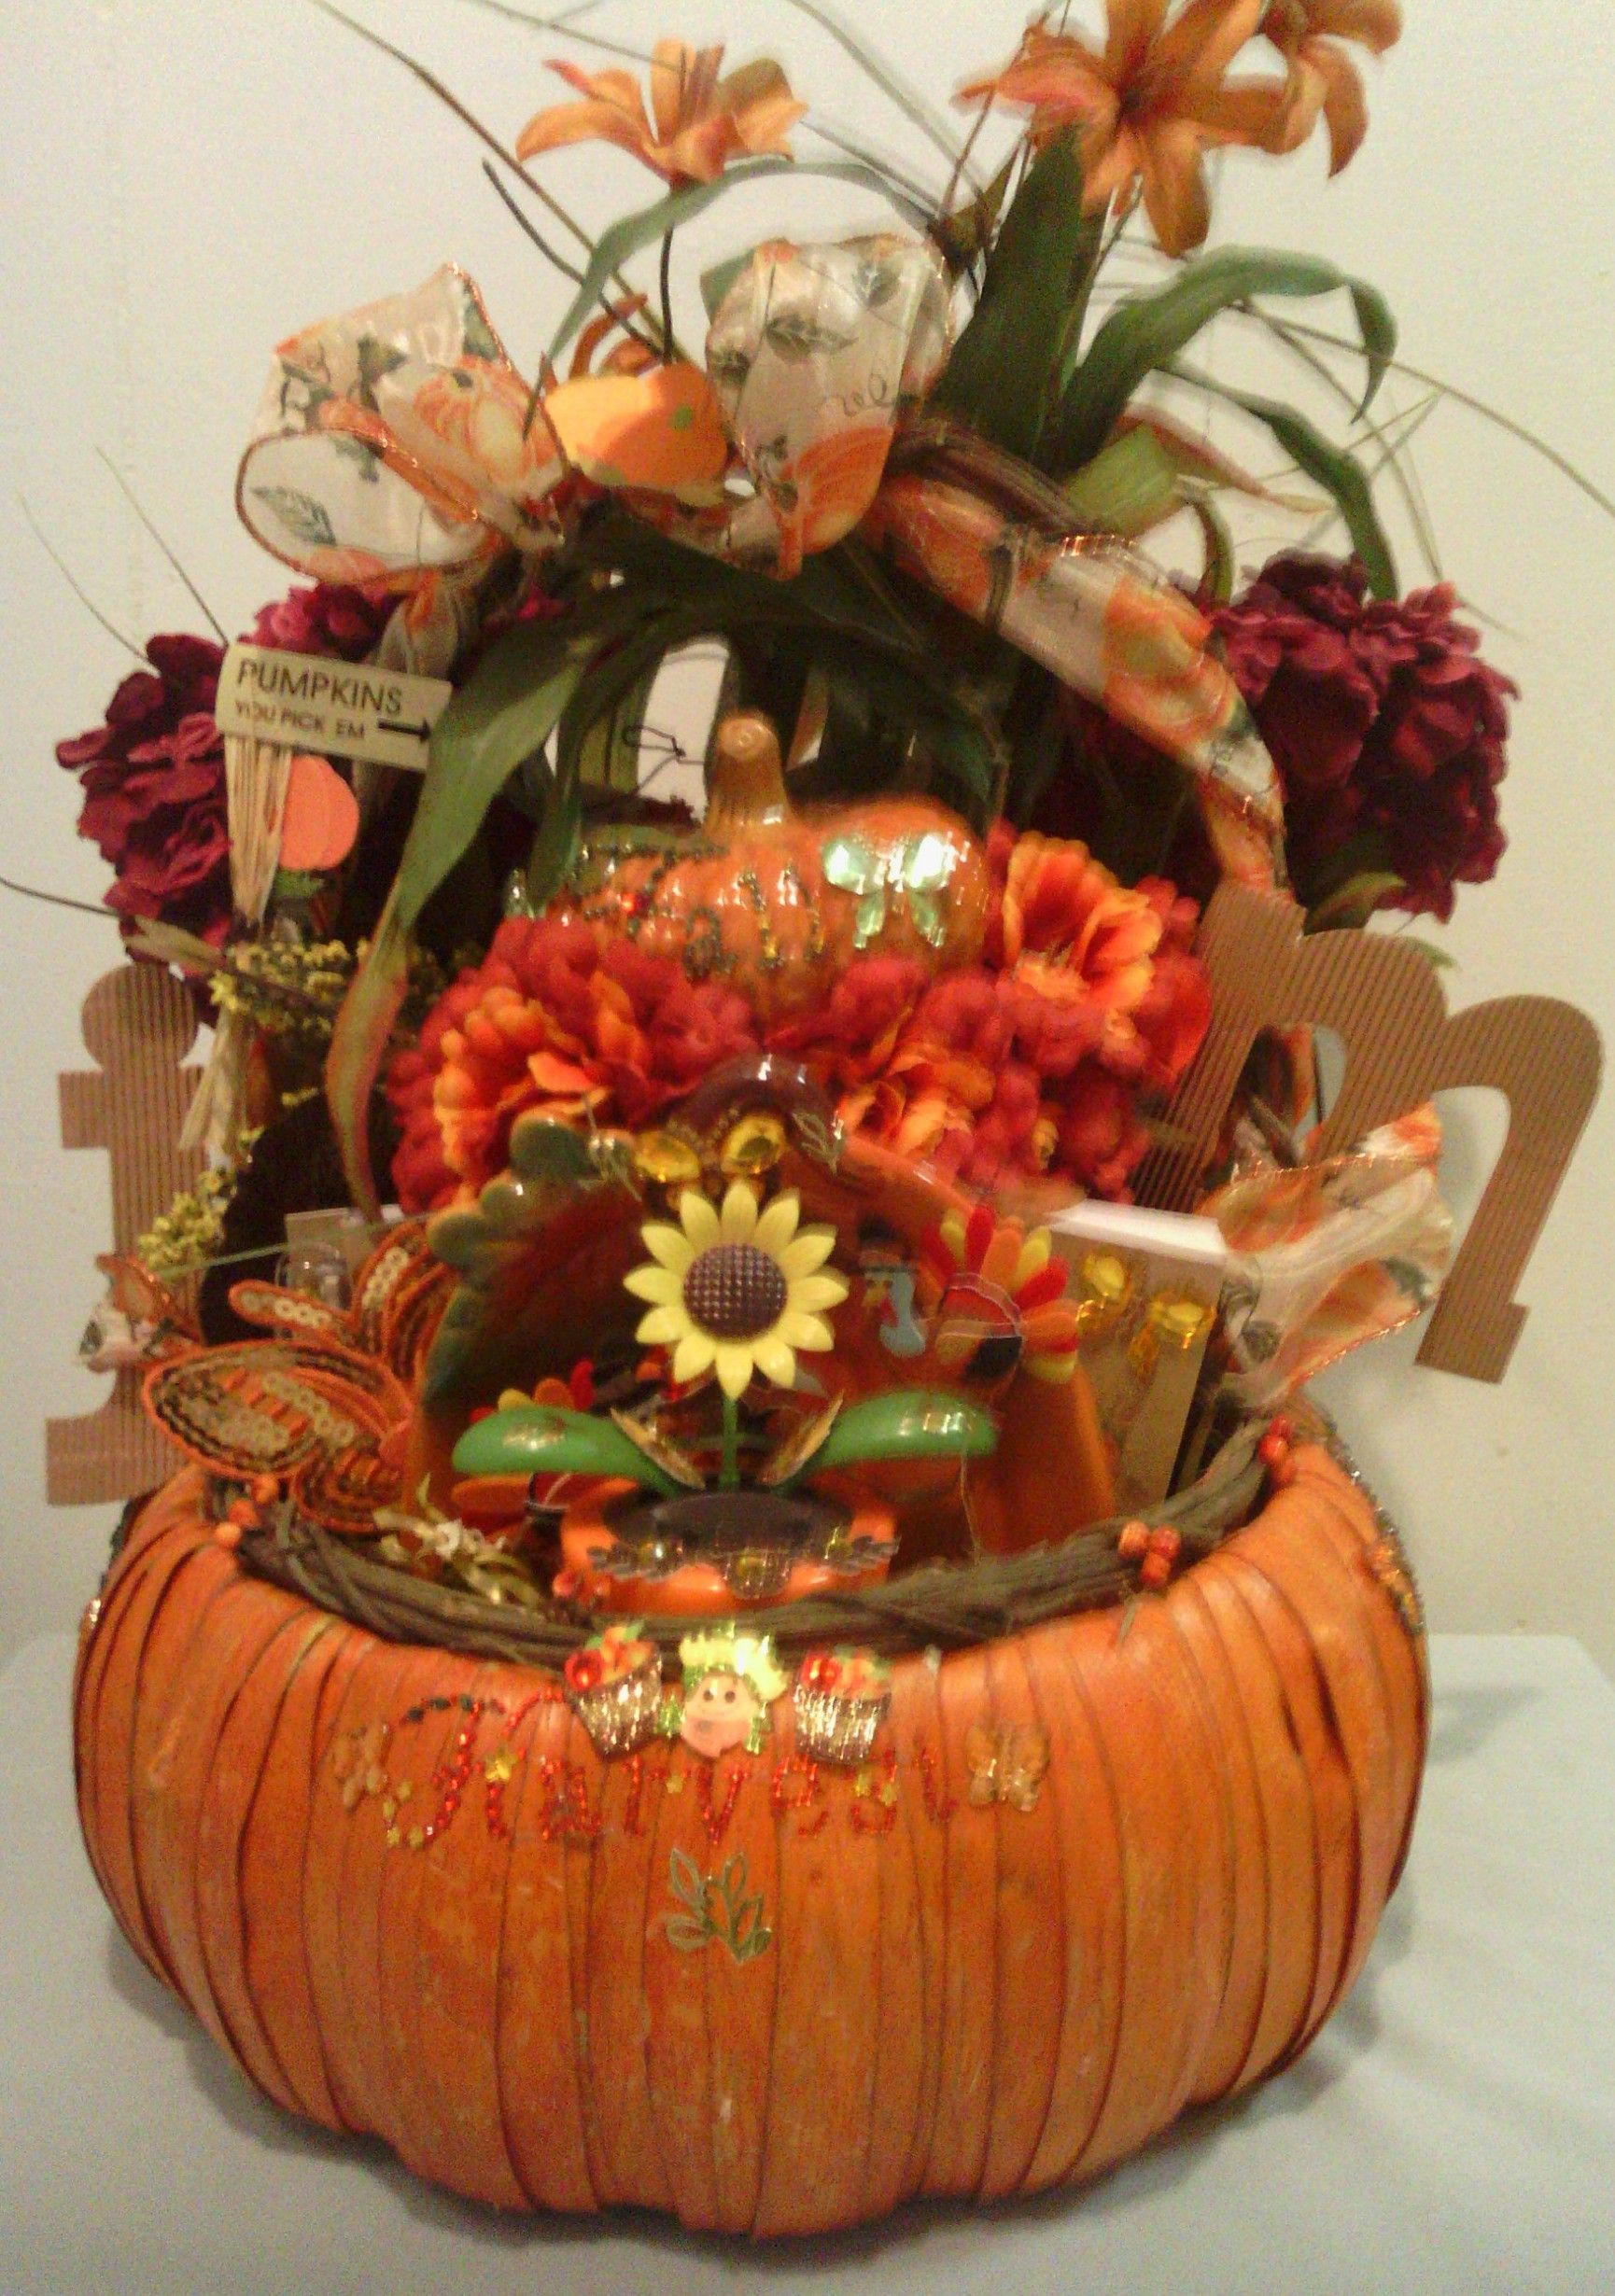 Autumn Gift Basket Ideas
 Here s another past Fall Gift Basket decoration where the